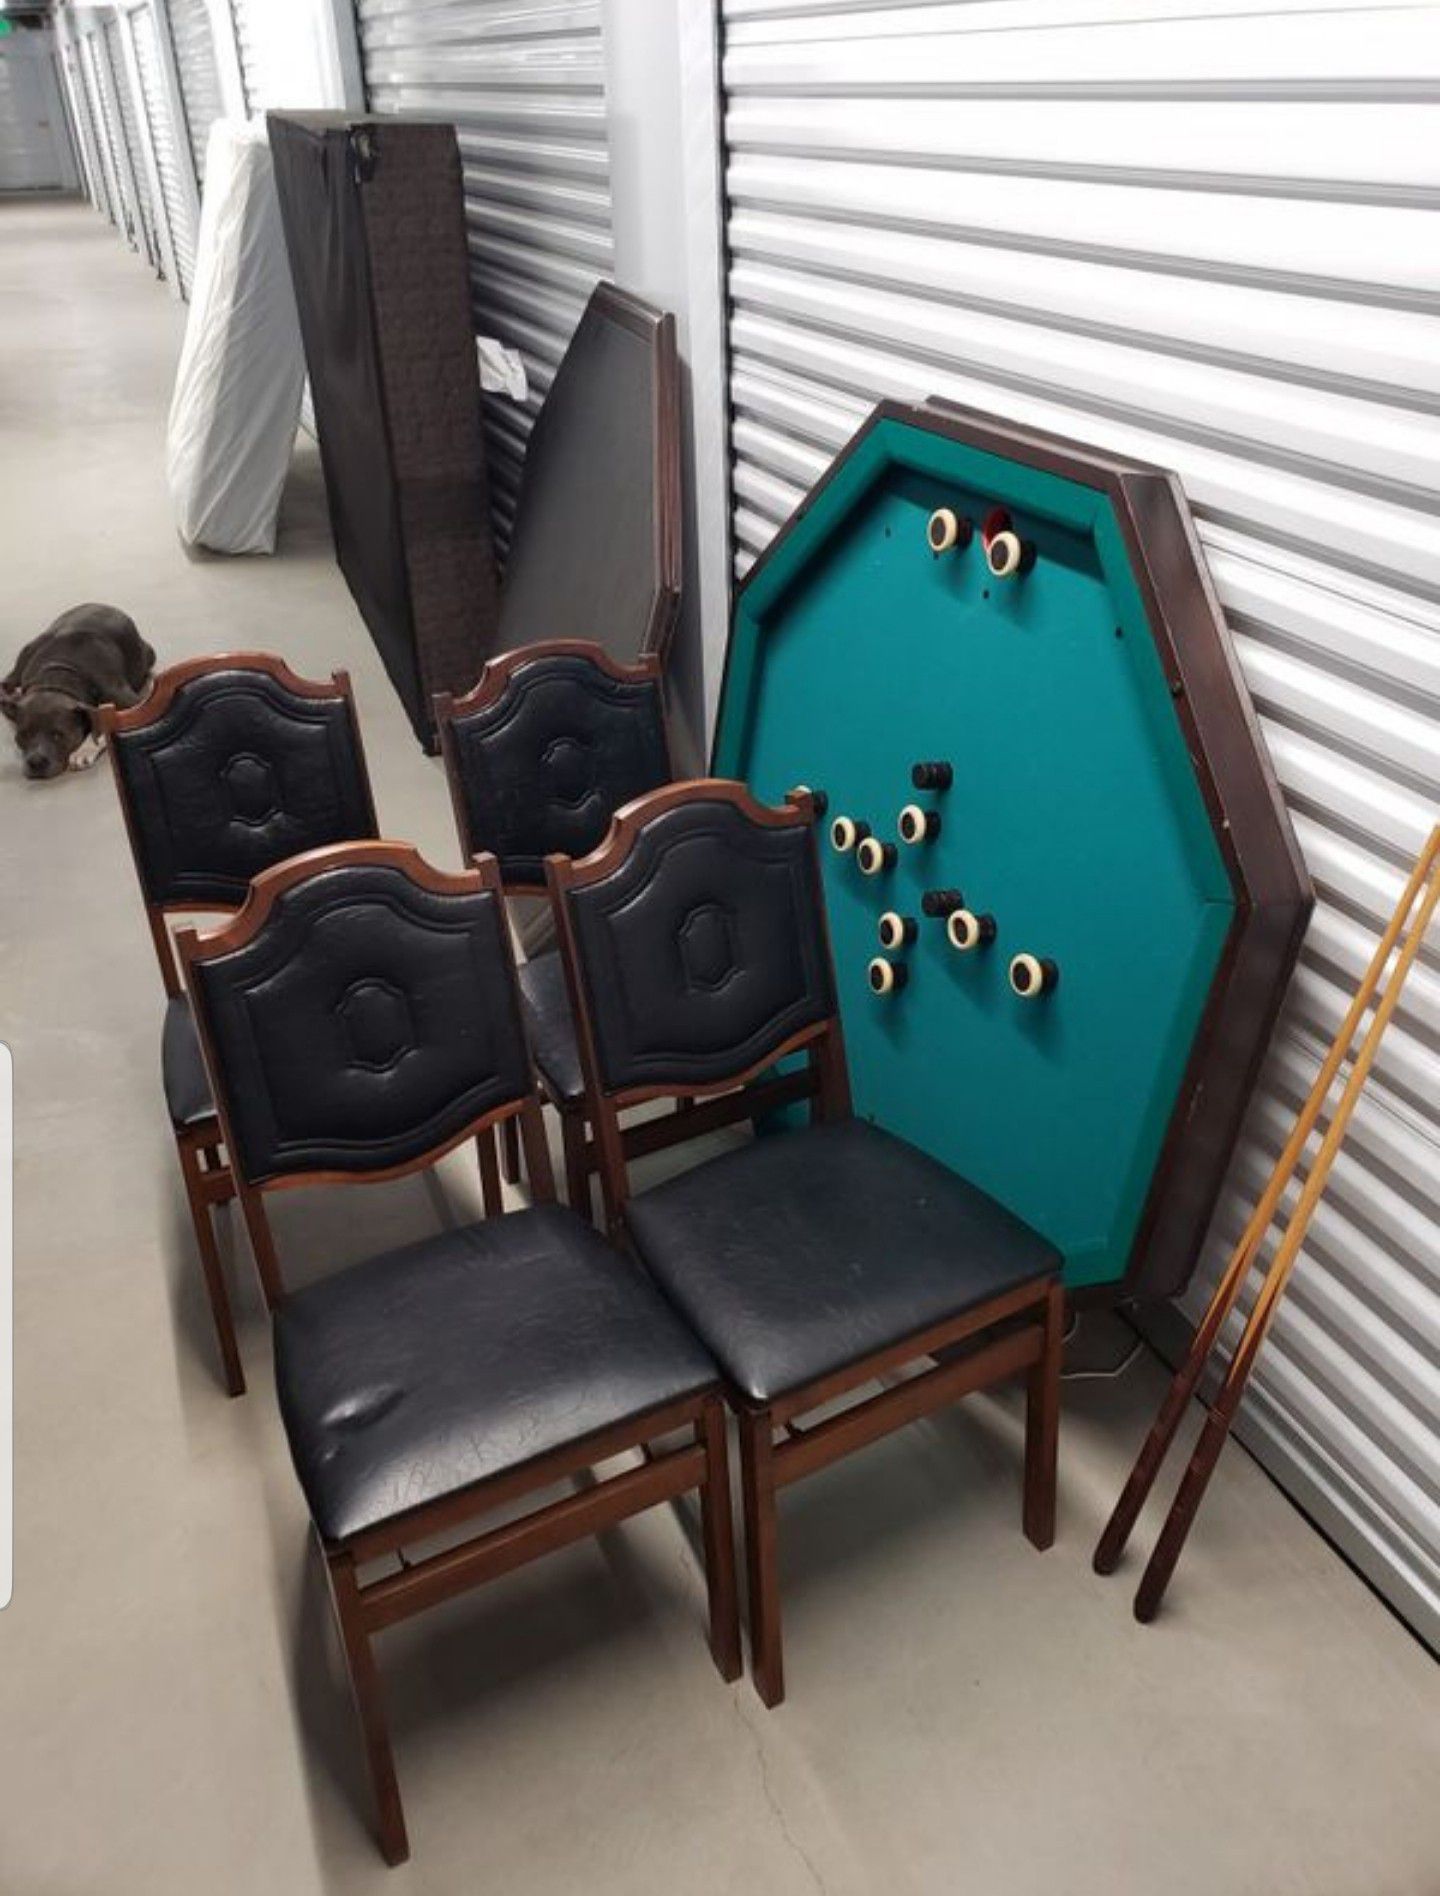 Vintage 3 in 1 Bumper Pool/Poker/DiningTable With Matching Vintage Foling Chairs